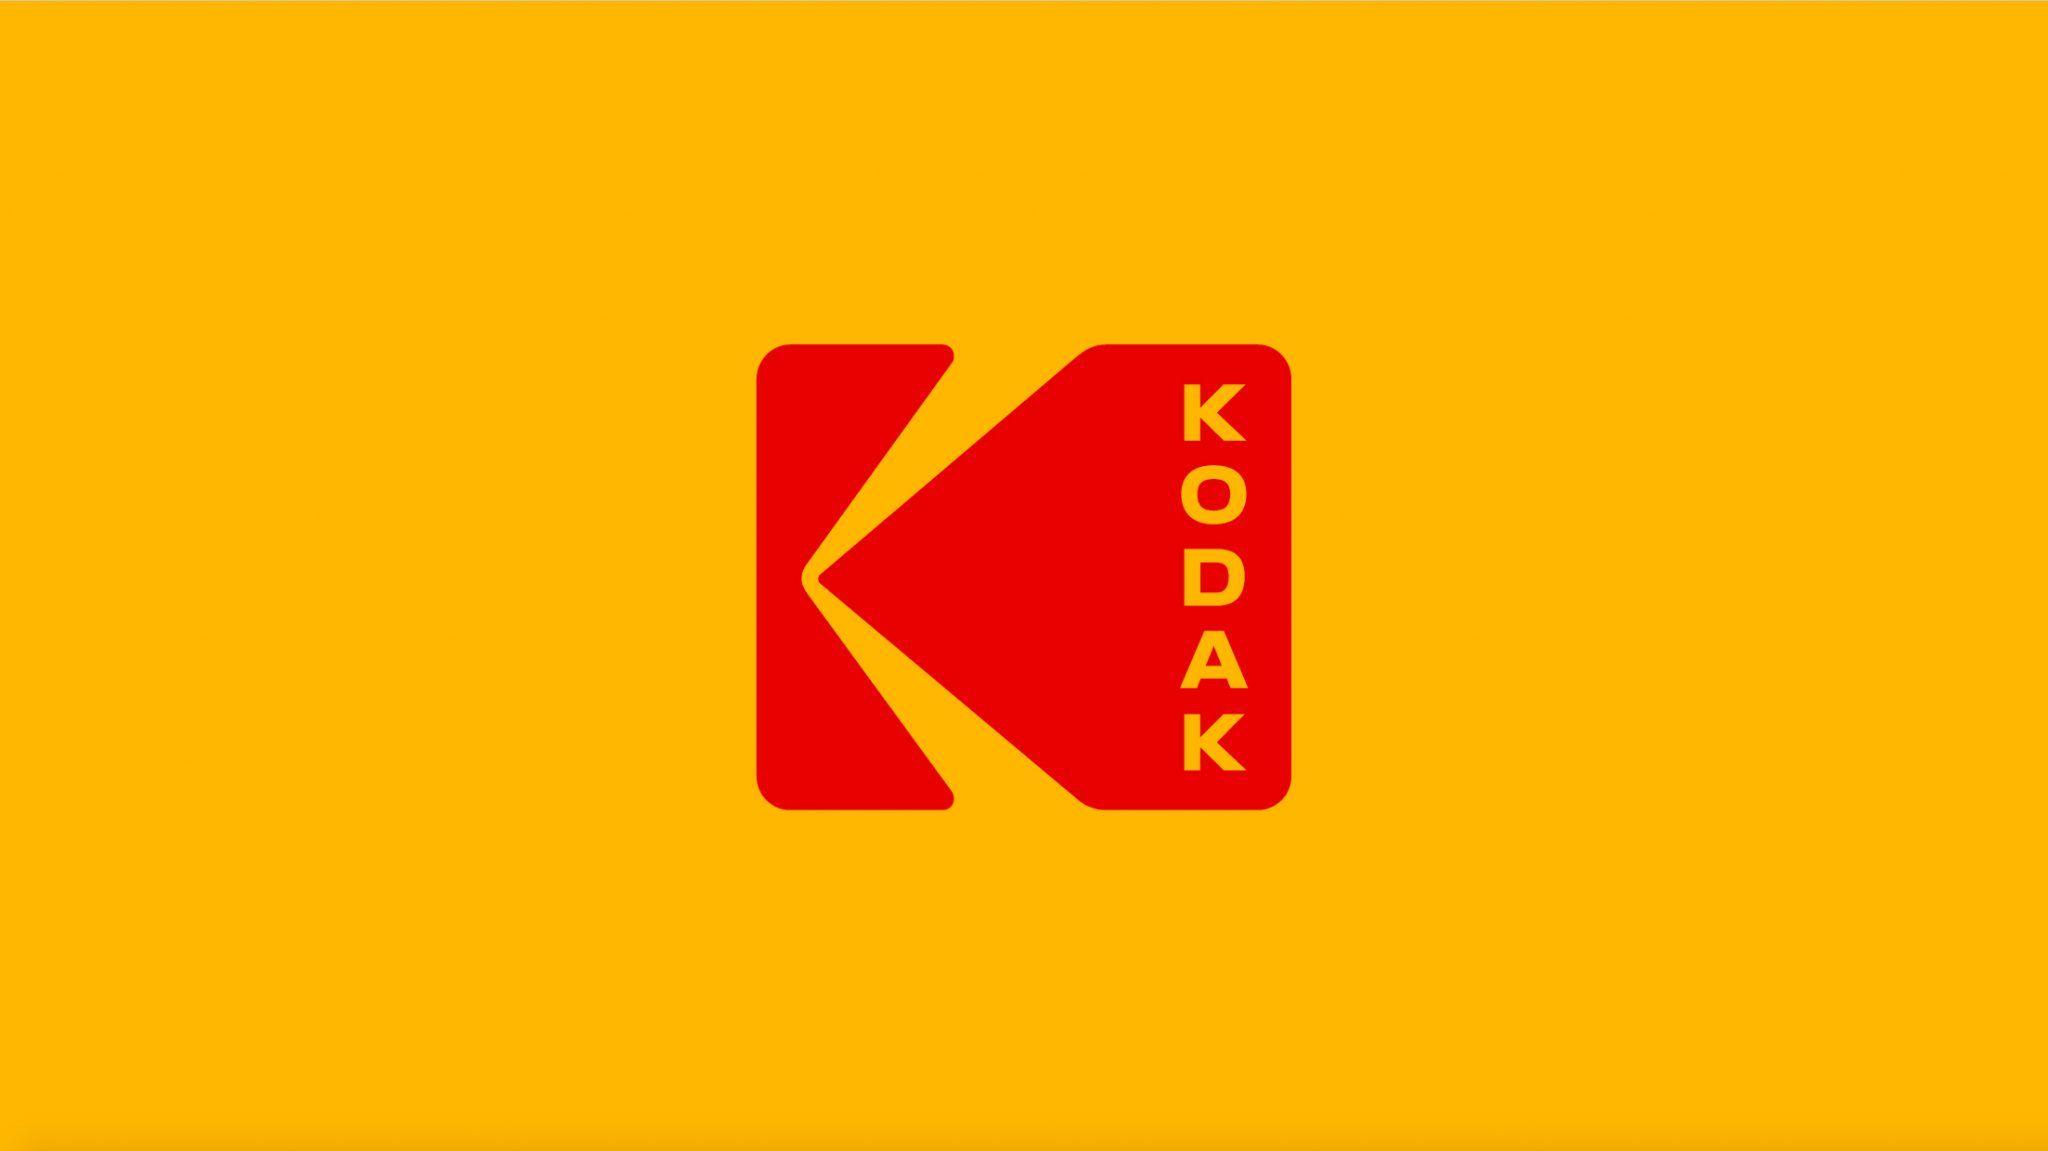 Text On Yellow Red Logo - Kodak brings back their classic logo (with a twist)